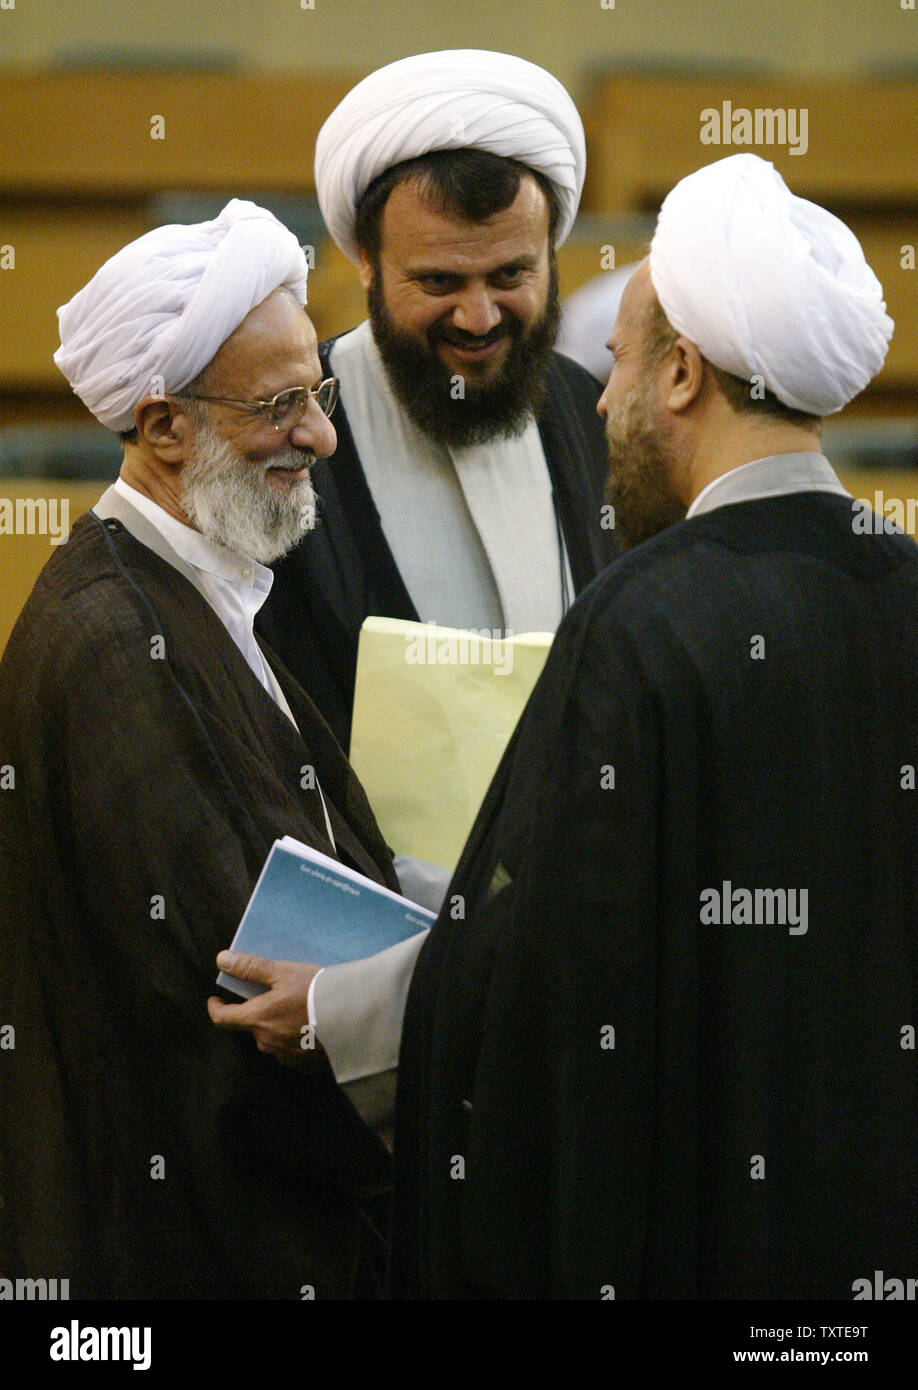 Iran's top cleric Mohammad Taqi Mesbah Yazdi (L) speaks with two unknown clerymen during the inauguration ceremony of the 4th International General Assembly session of The Ahlul-Bayt World Assembly at Tehran Summit Hall in Tehran, Iran on August 18, 2007. Tehran has declared illegal the alleged intention by the US government to label the Iranian Revolutionary Guard as a foreign terrorist organization. (UPI Photo/Mohammad Kheirkhah) Stock Photo